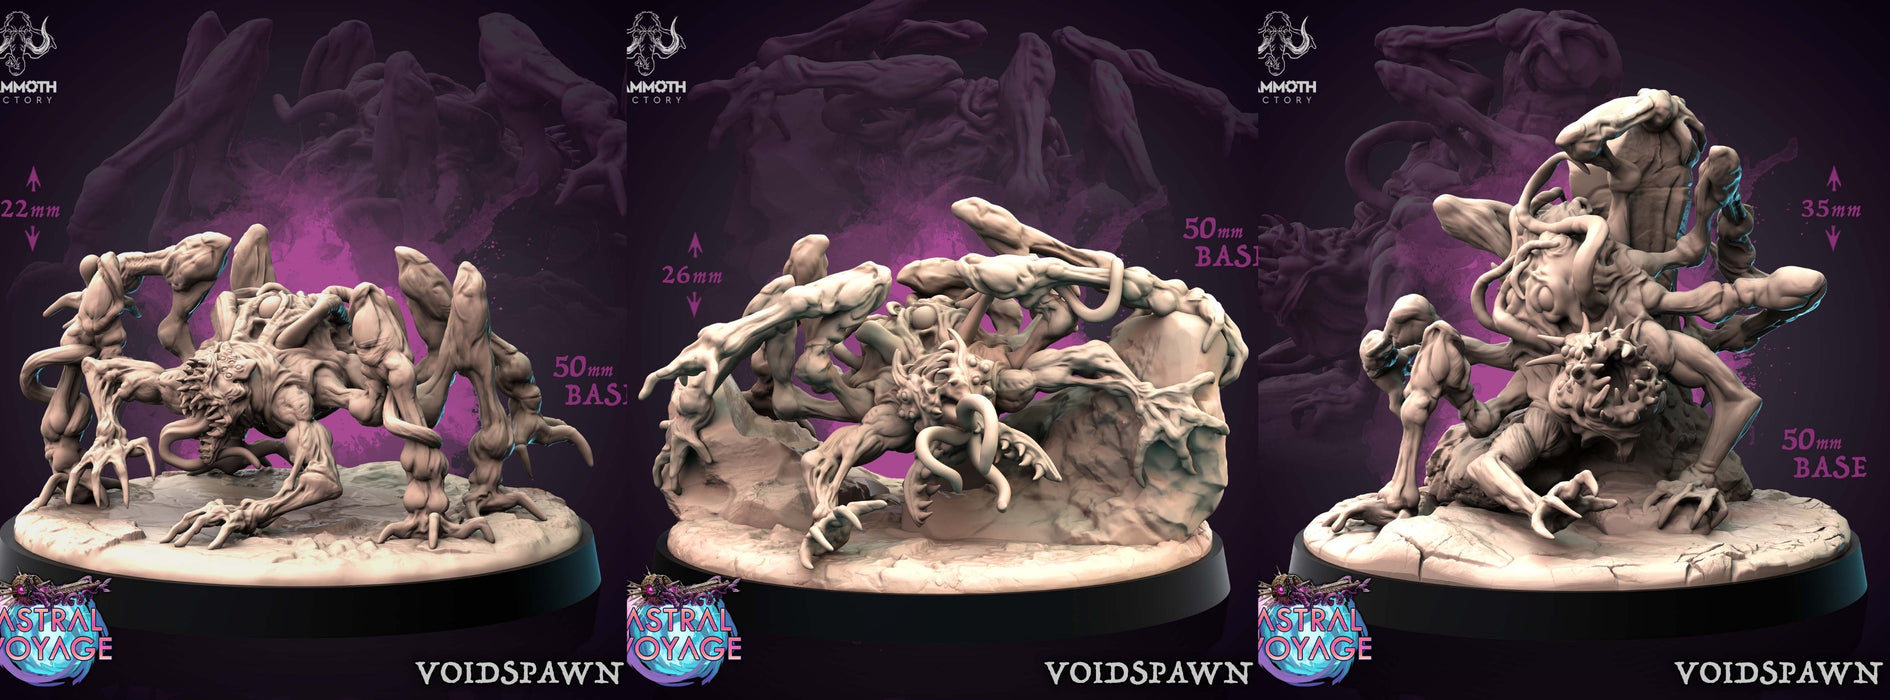 Astral Voyage Miniatures (Full Set) | Fantasy Tabletop Miniature | Mammoth Factory TabletopXtra